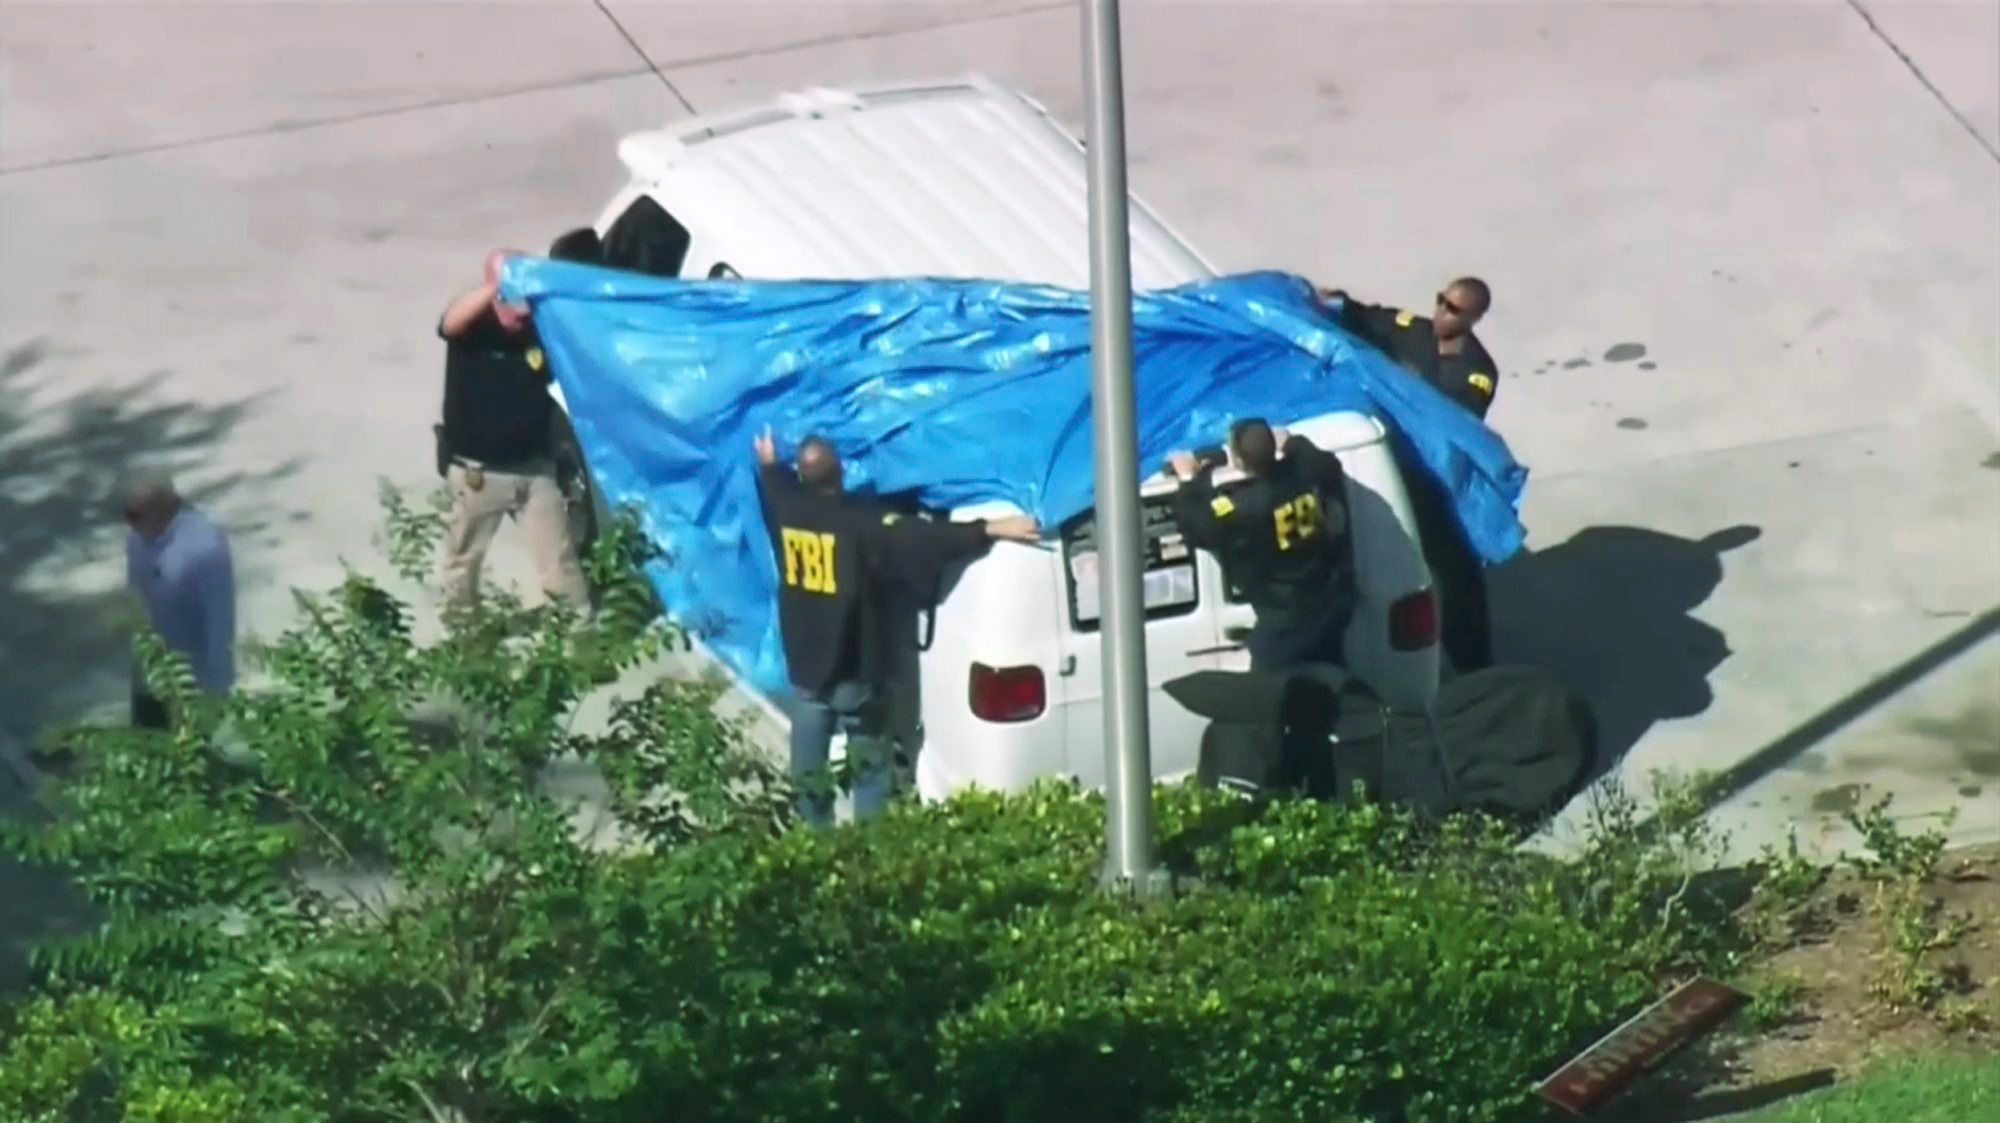 In this frame grab from video provided by WPLG-TV, FBI agents cover a van parked in Plantation, Fla., on Friday, Oct. 26, 2018, that federal agents and police officers have been examining in connection with package bombs that were sent to high-profile critics of President Donald Trump. The van has several stickers on the windows, including American flags, decals with logos and text. (WPLG-TV via AP) Explosive Devices